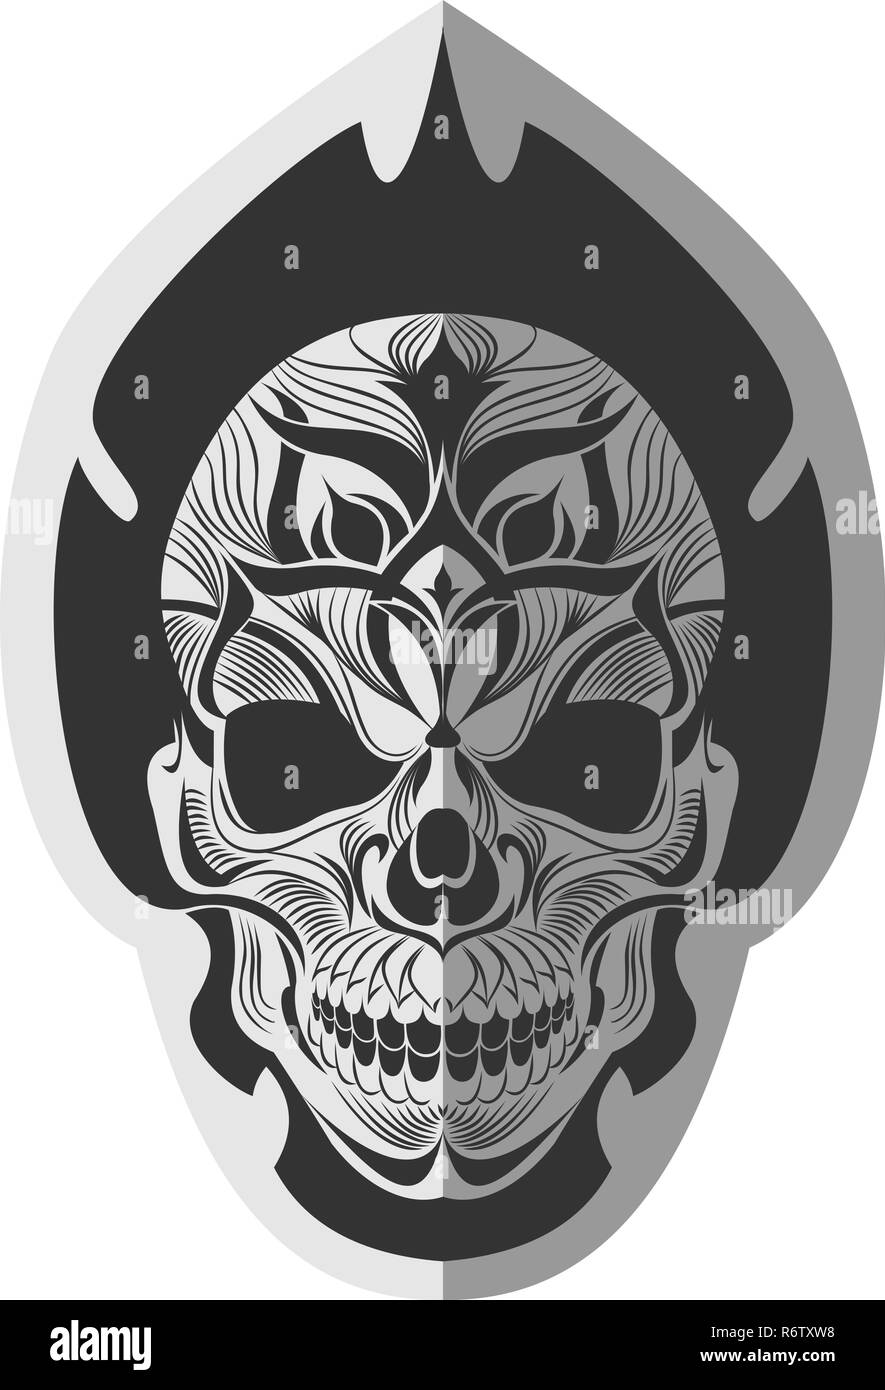 Decorative black and white skull flat paper memorable art for sticker, tattoo or t-shirt printing Stock Vector